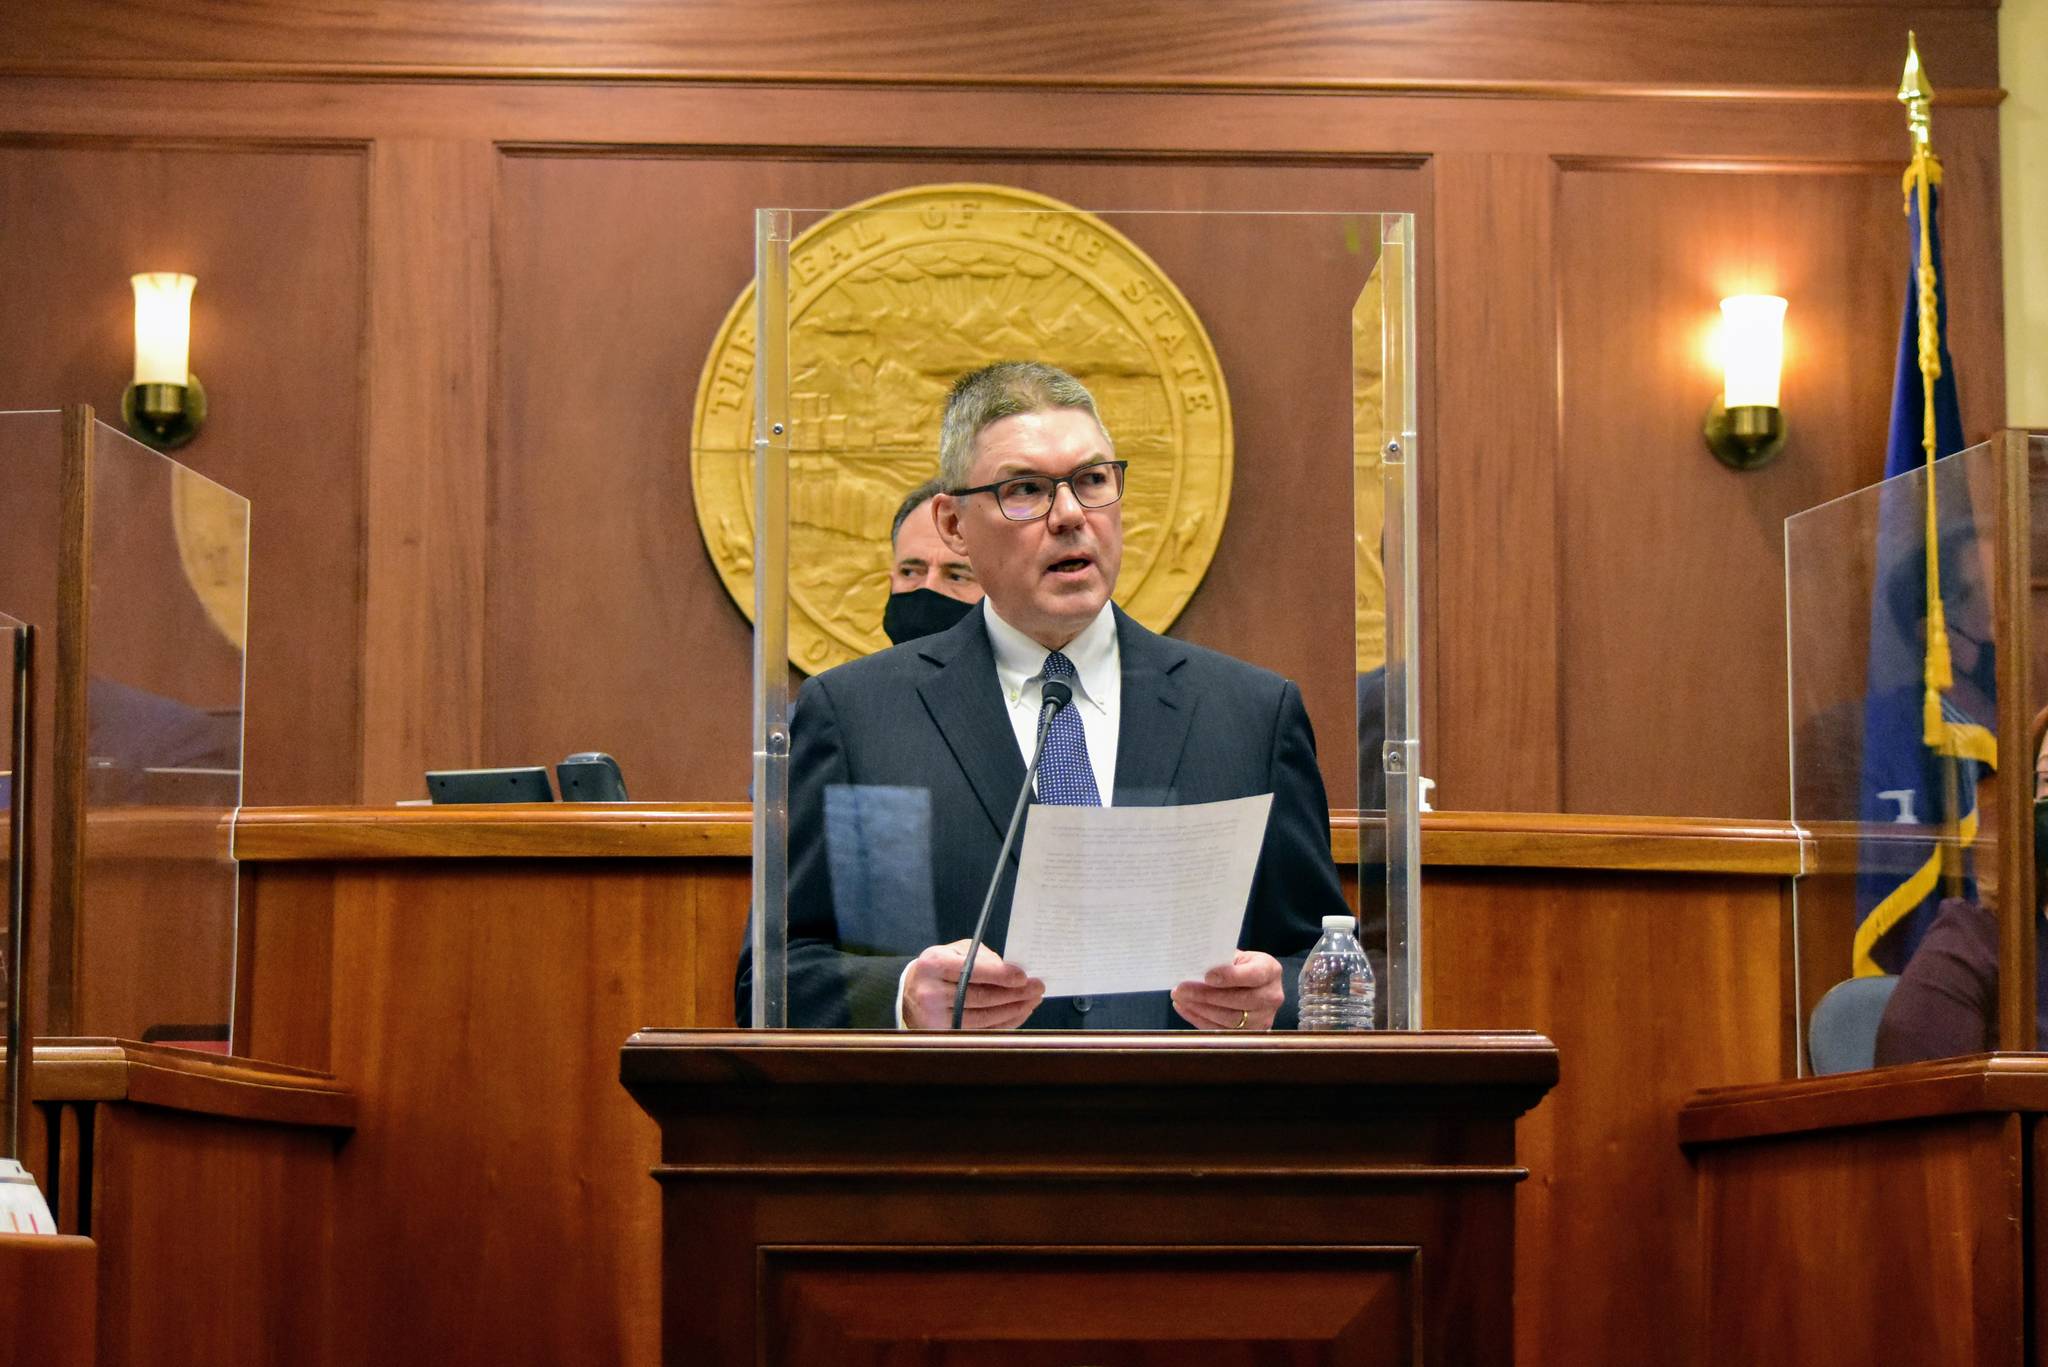 Peter Segall / Juneau Empire
Chief Justice of the Alaska Supreme Court Joel Bolger speaks from behind a plexiglass encased lectern Wednesday to deliver the State of the Judiciary address to state lawmakers. Despite complications posed by the pandemic, Bolger said Alaskan courts were still able to deliver services.